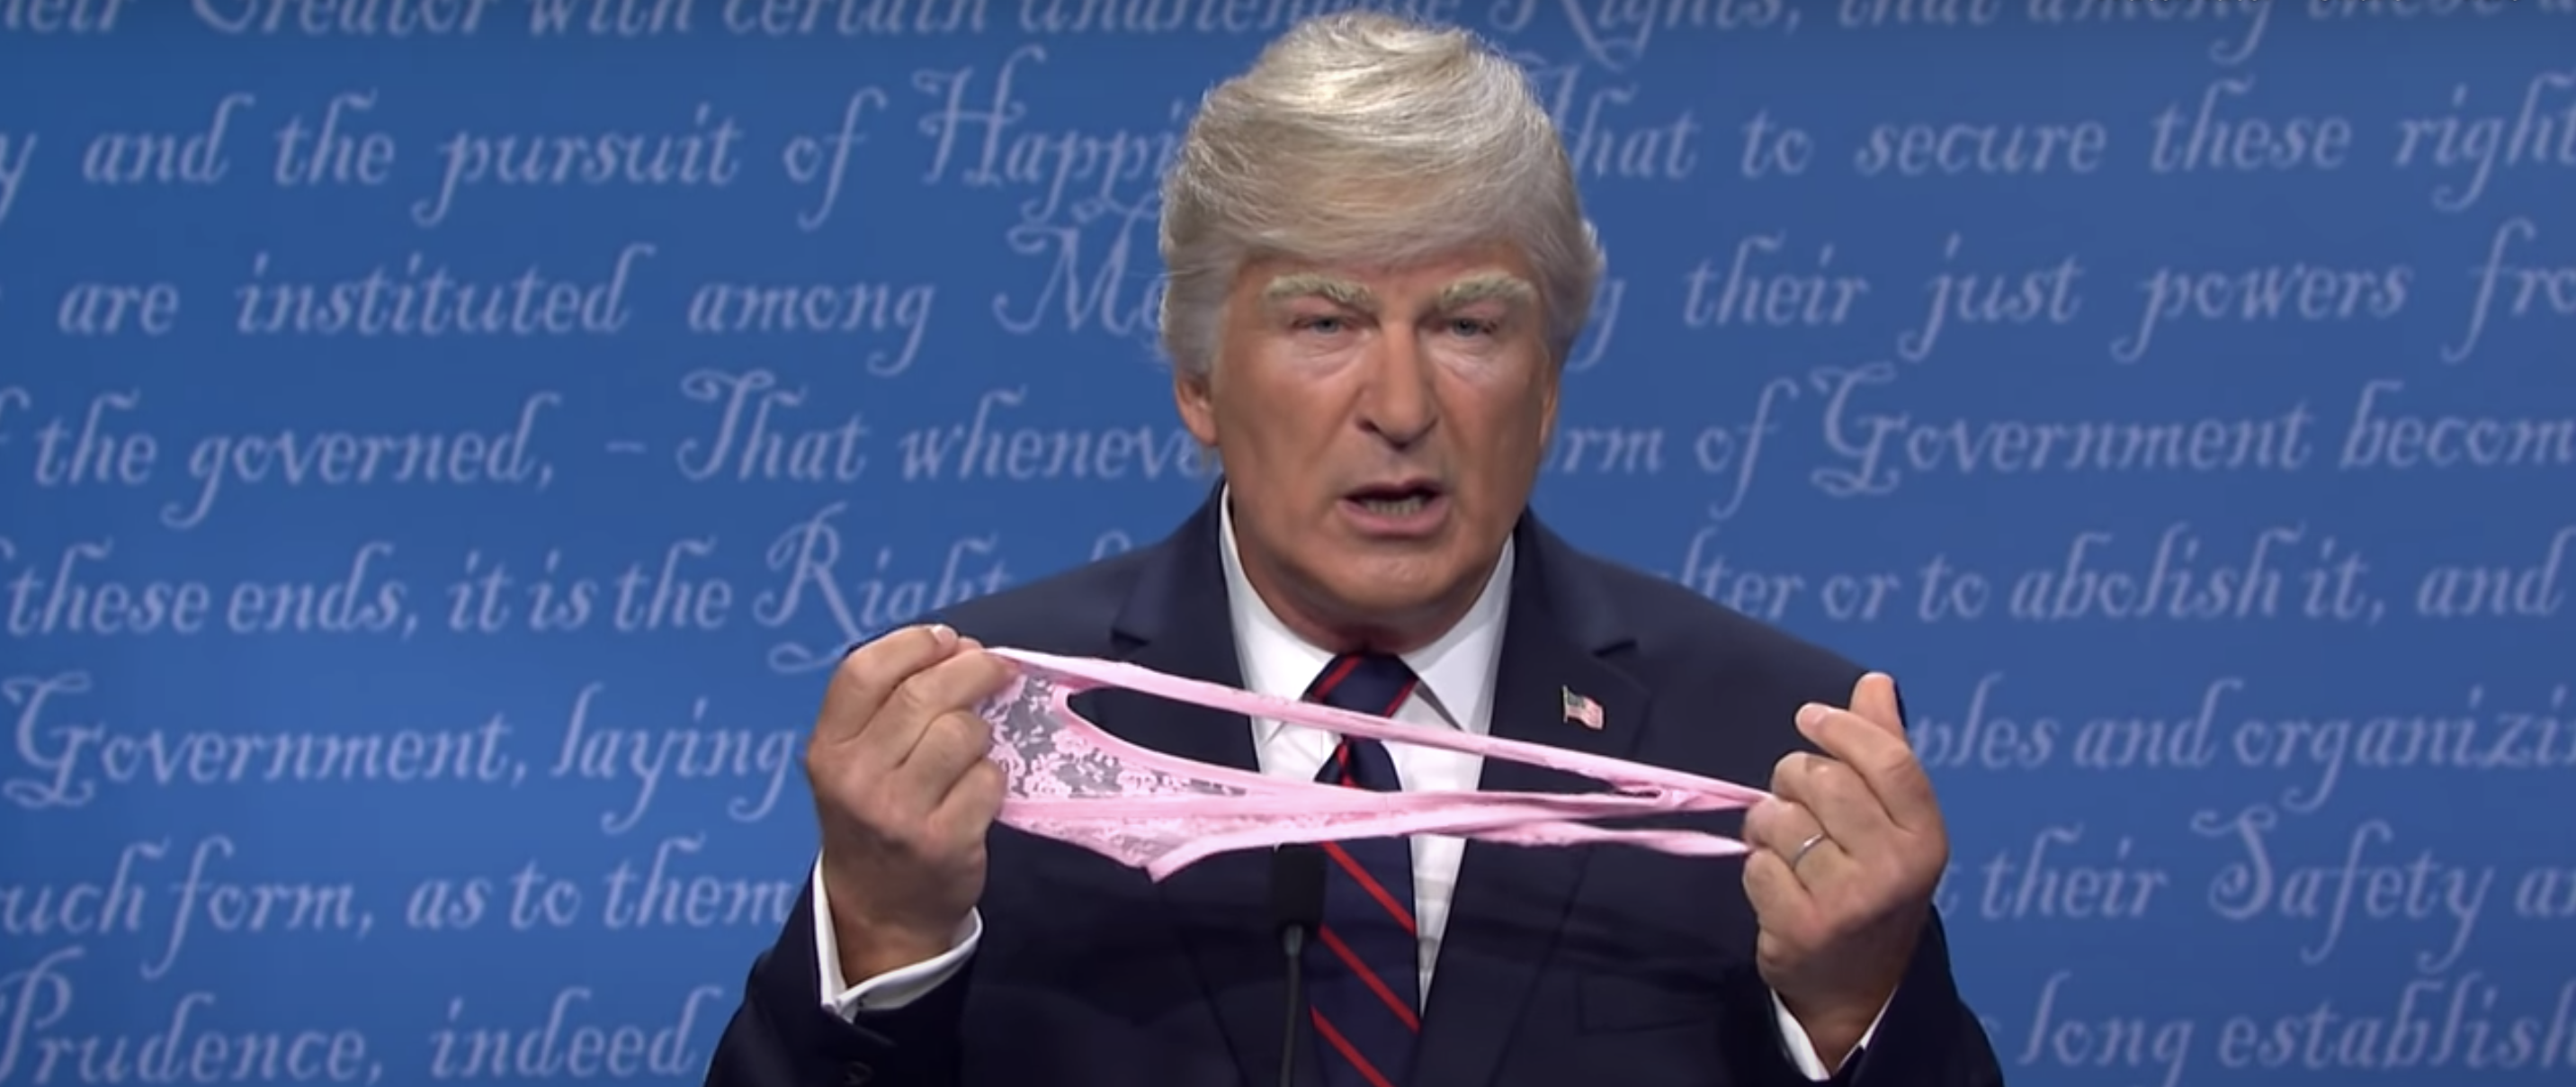 Trump holding up a lace thong